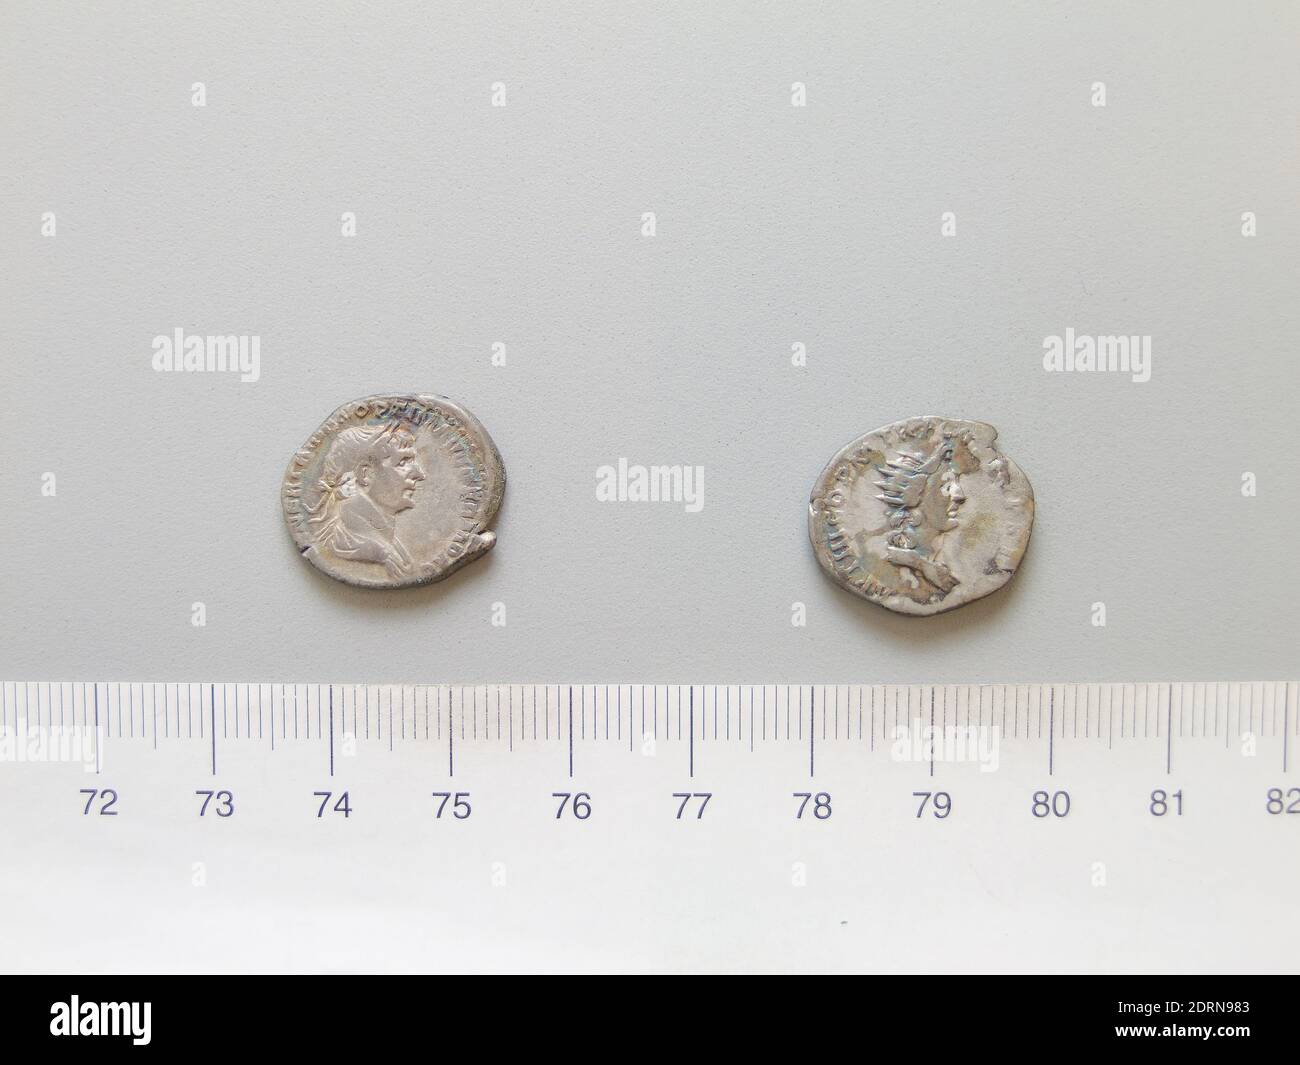 Ruler: Trajan, Emperor of Rome, A.D. 53–117, ruled 98–117, Mint: Rome, Denarius of Trajan, Emperor of Rome from Rome, 112–17, Silver, 3.12 g, 7:00, 18.5 mm, Made in Rome, Italy, Roman, 2nd century, Numismatics Stock Photo